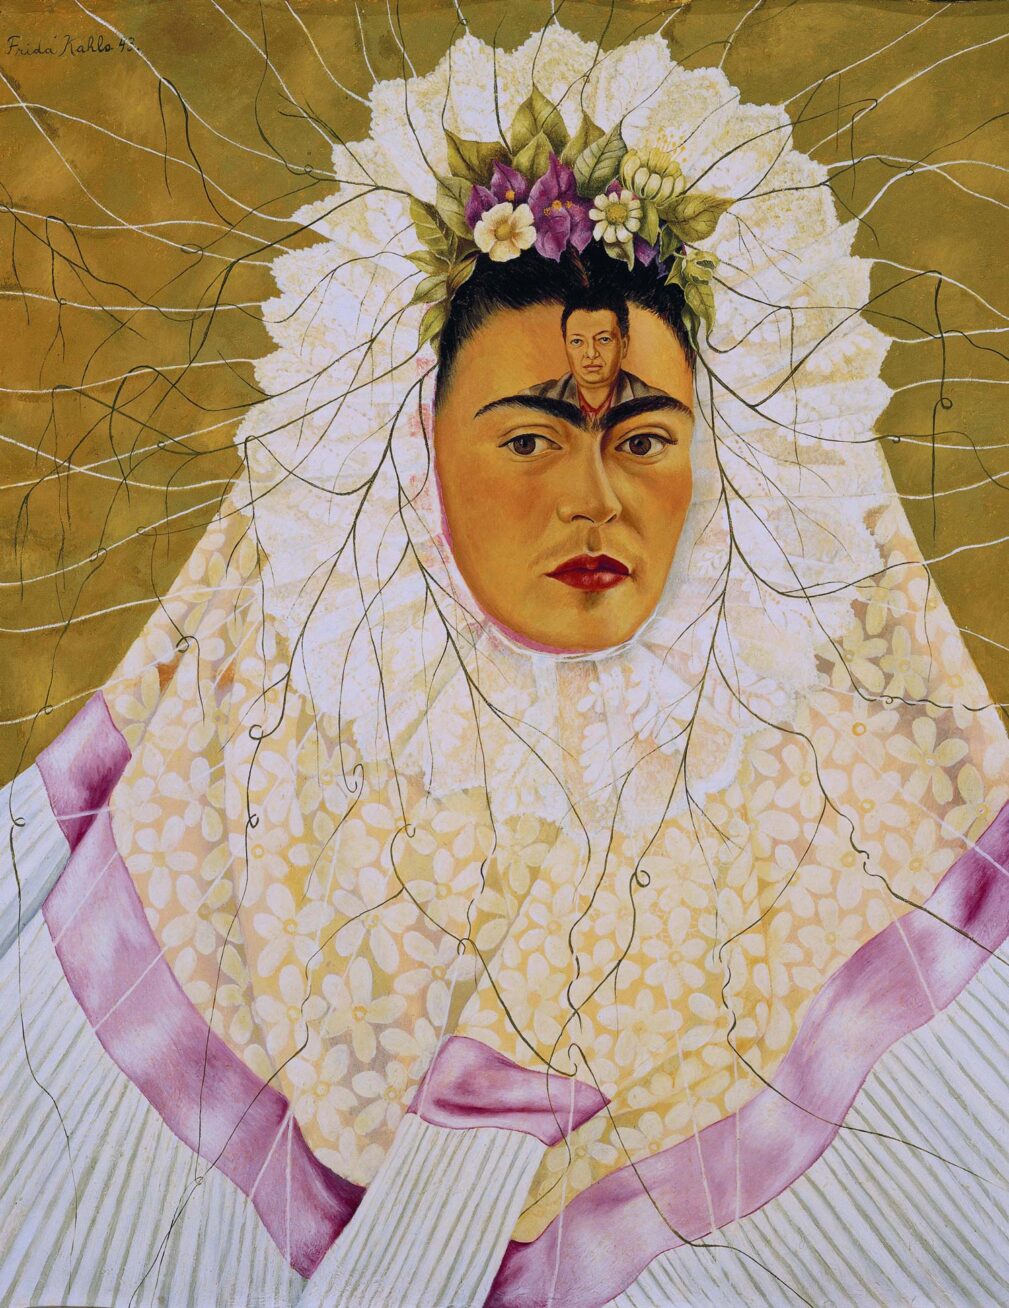 Painting of Frida Kahlo with a white veil and purple and white flowers framing her face and a small image of Diego Rivera on her forehead